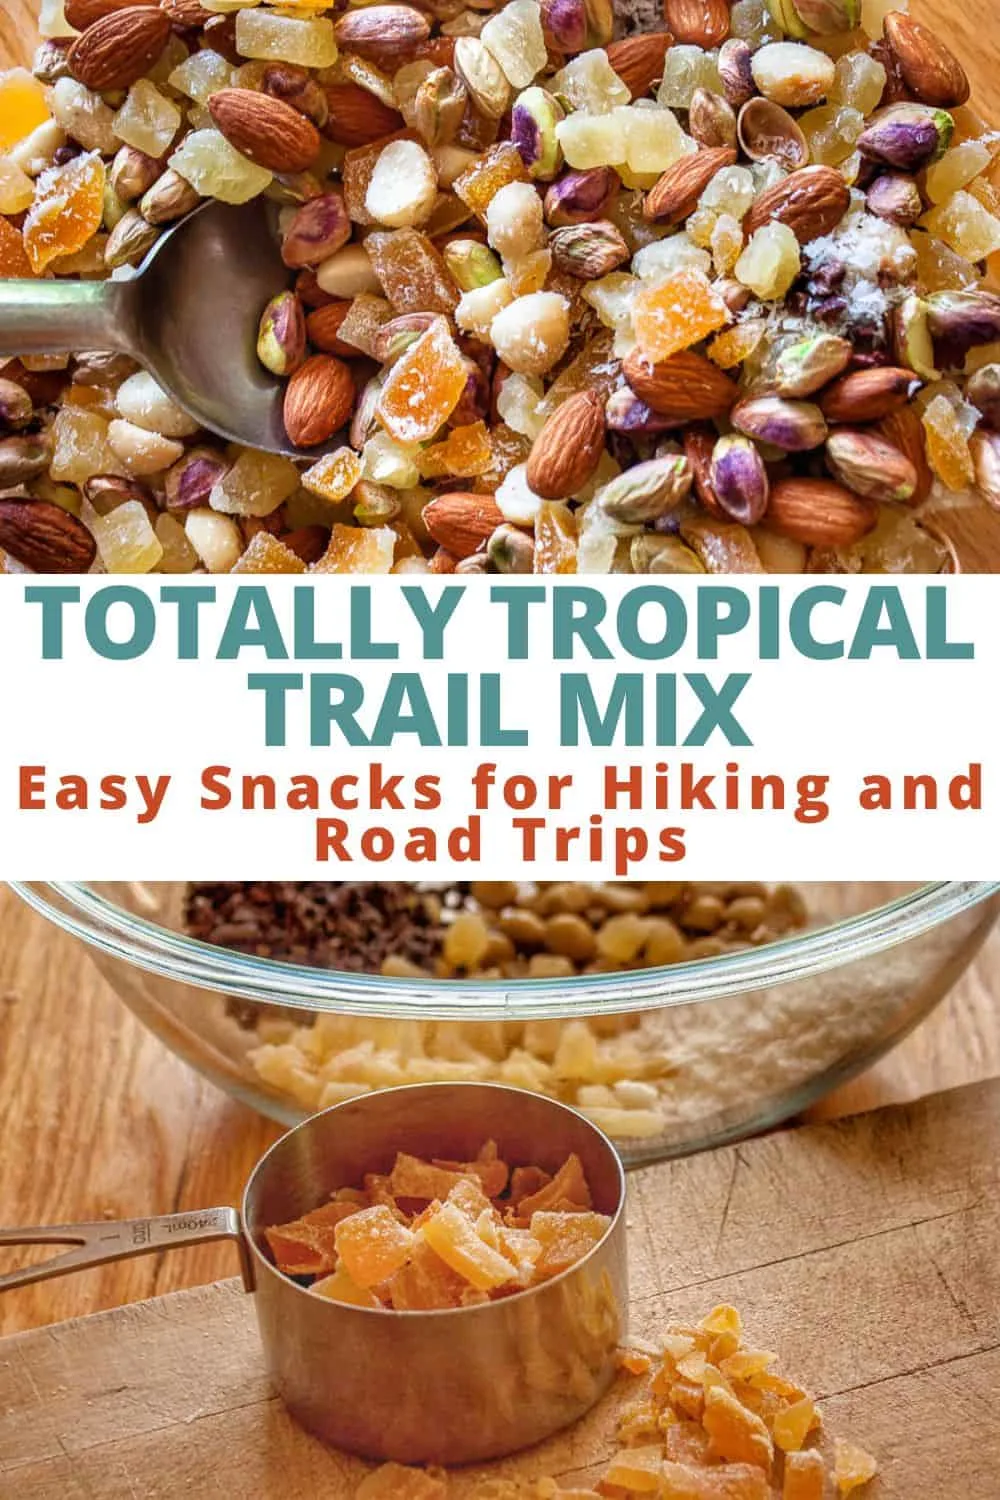 A collage of tropical trail mix photos.